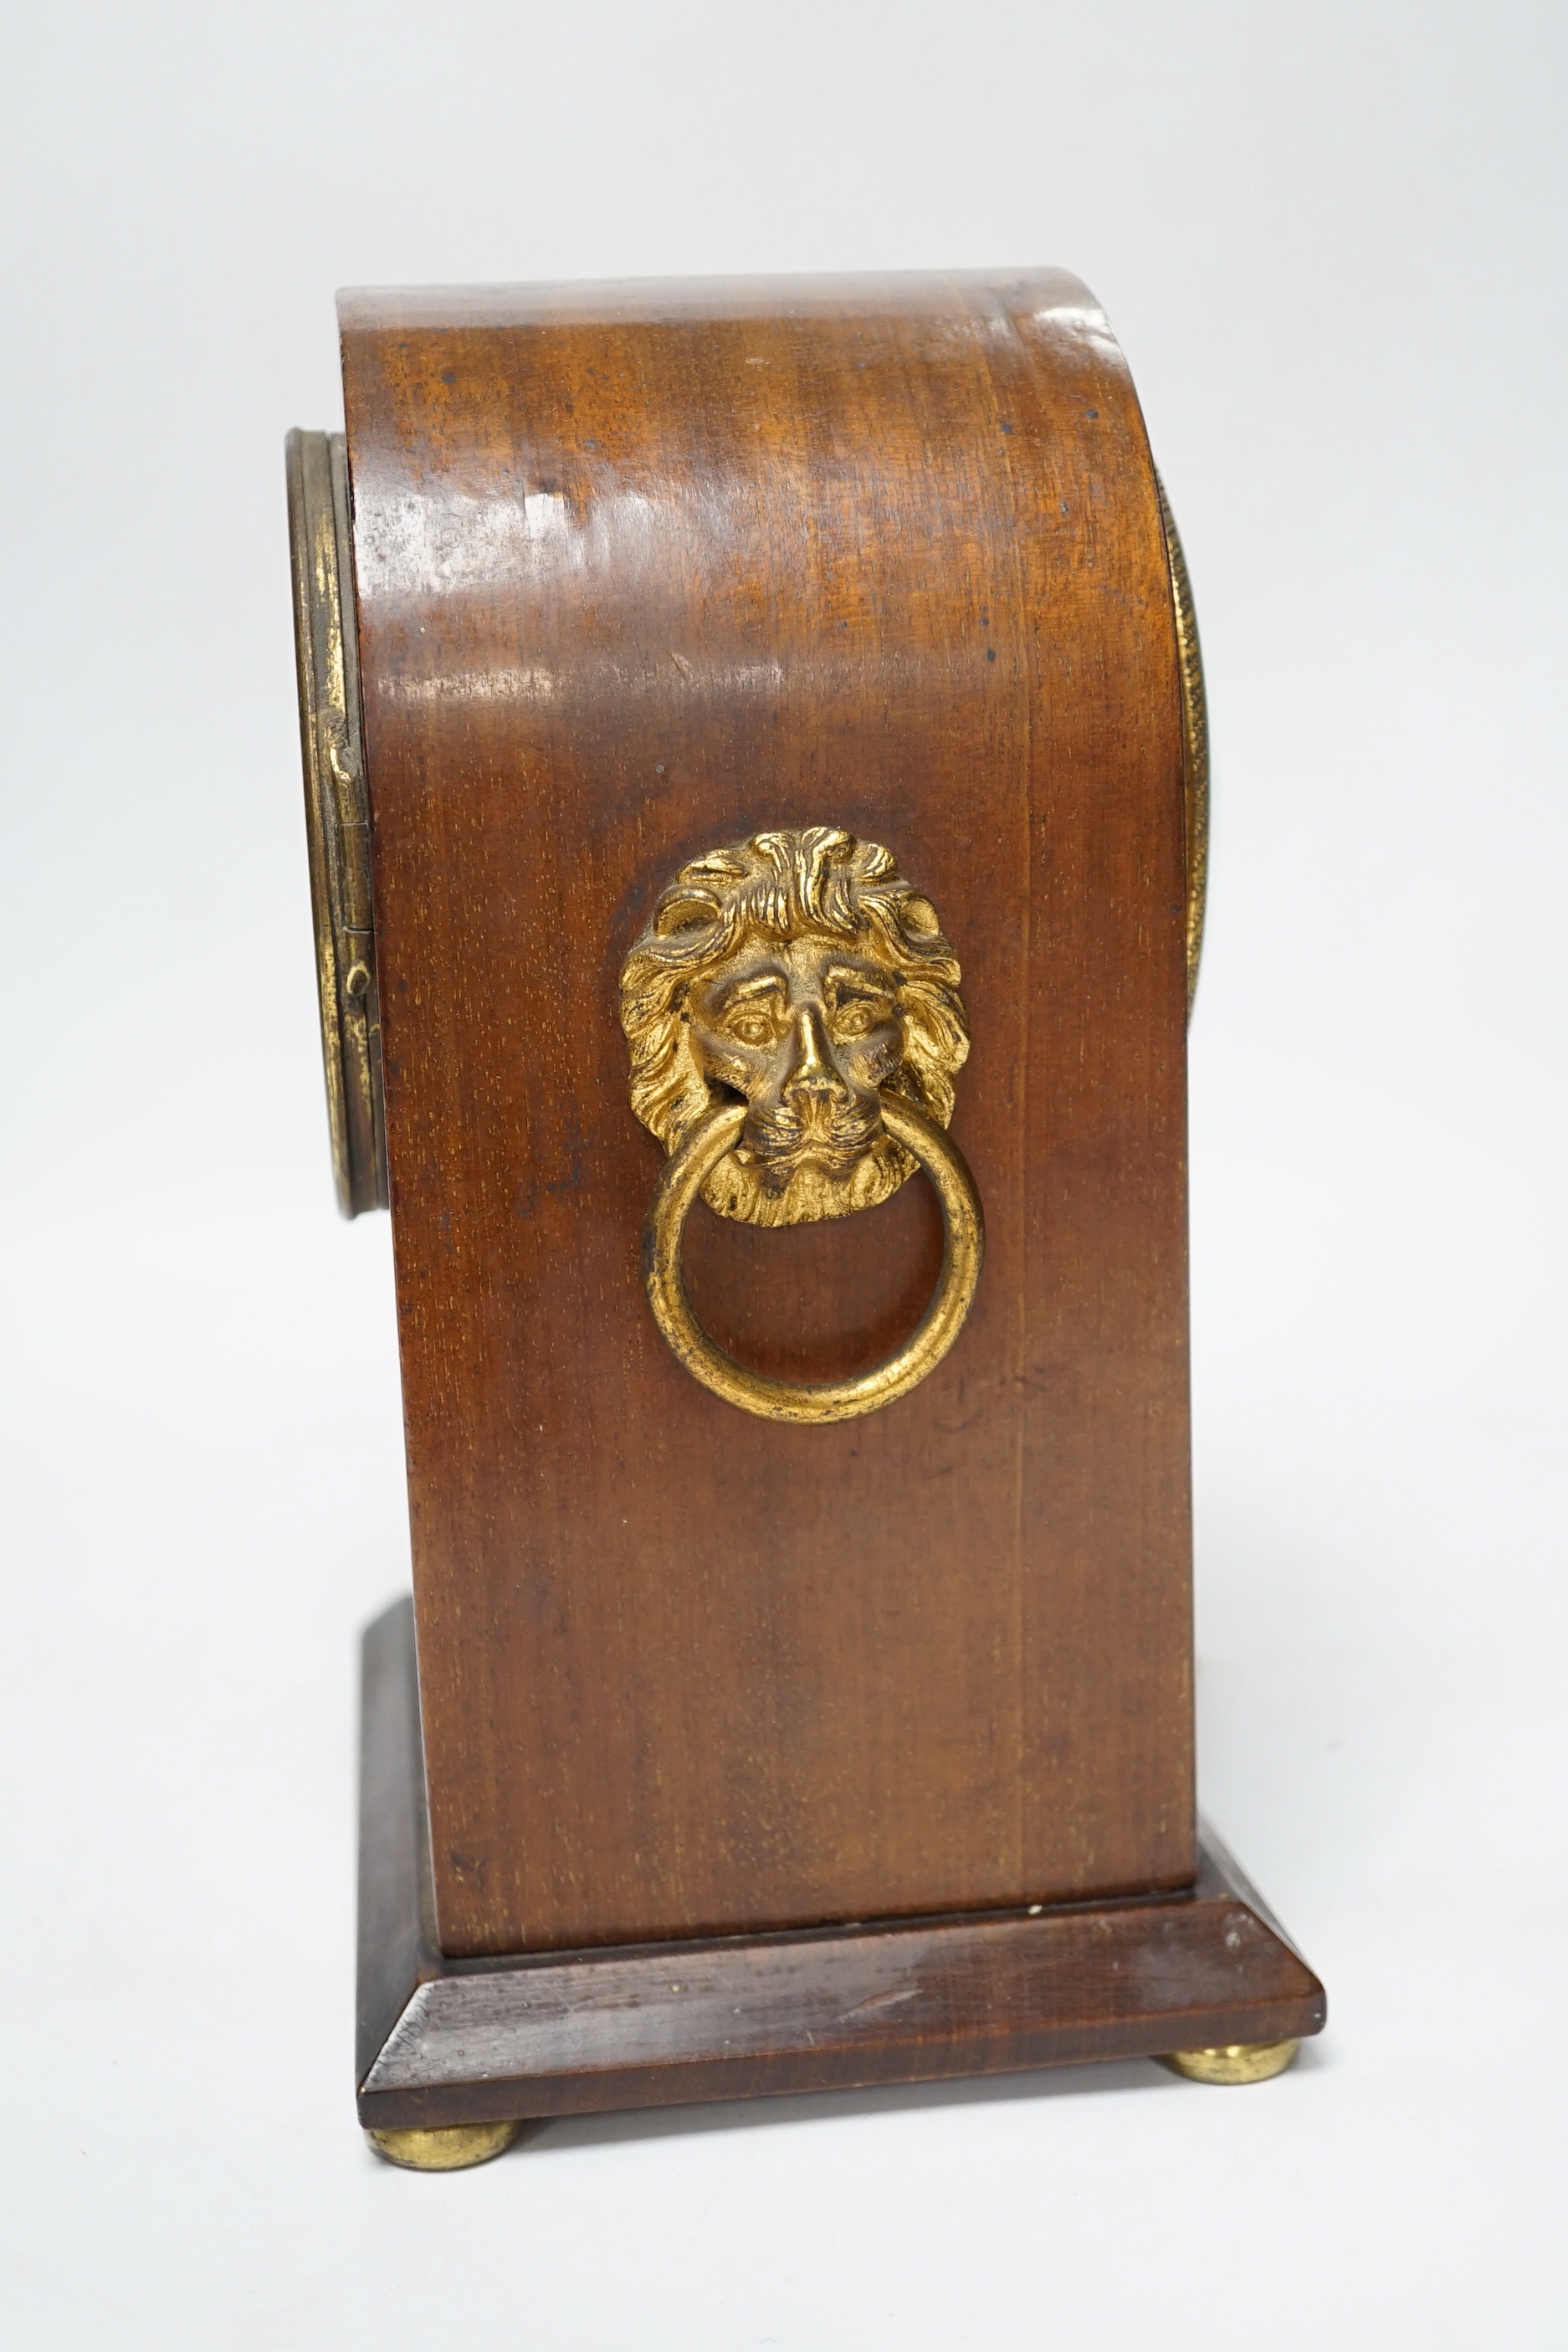 An Edwardian mahogany mantel clock, French movement striking on a coiled gong, 25cm high